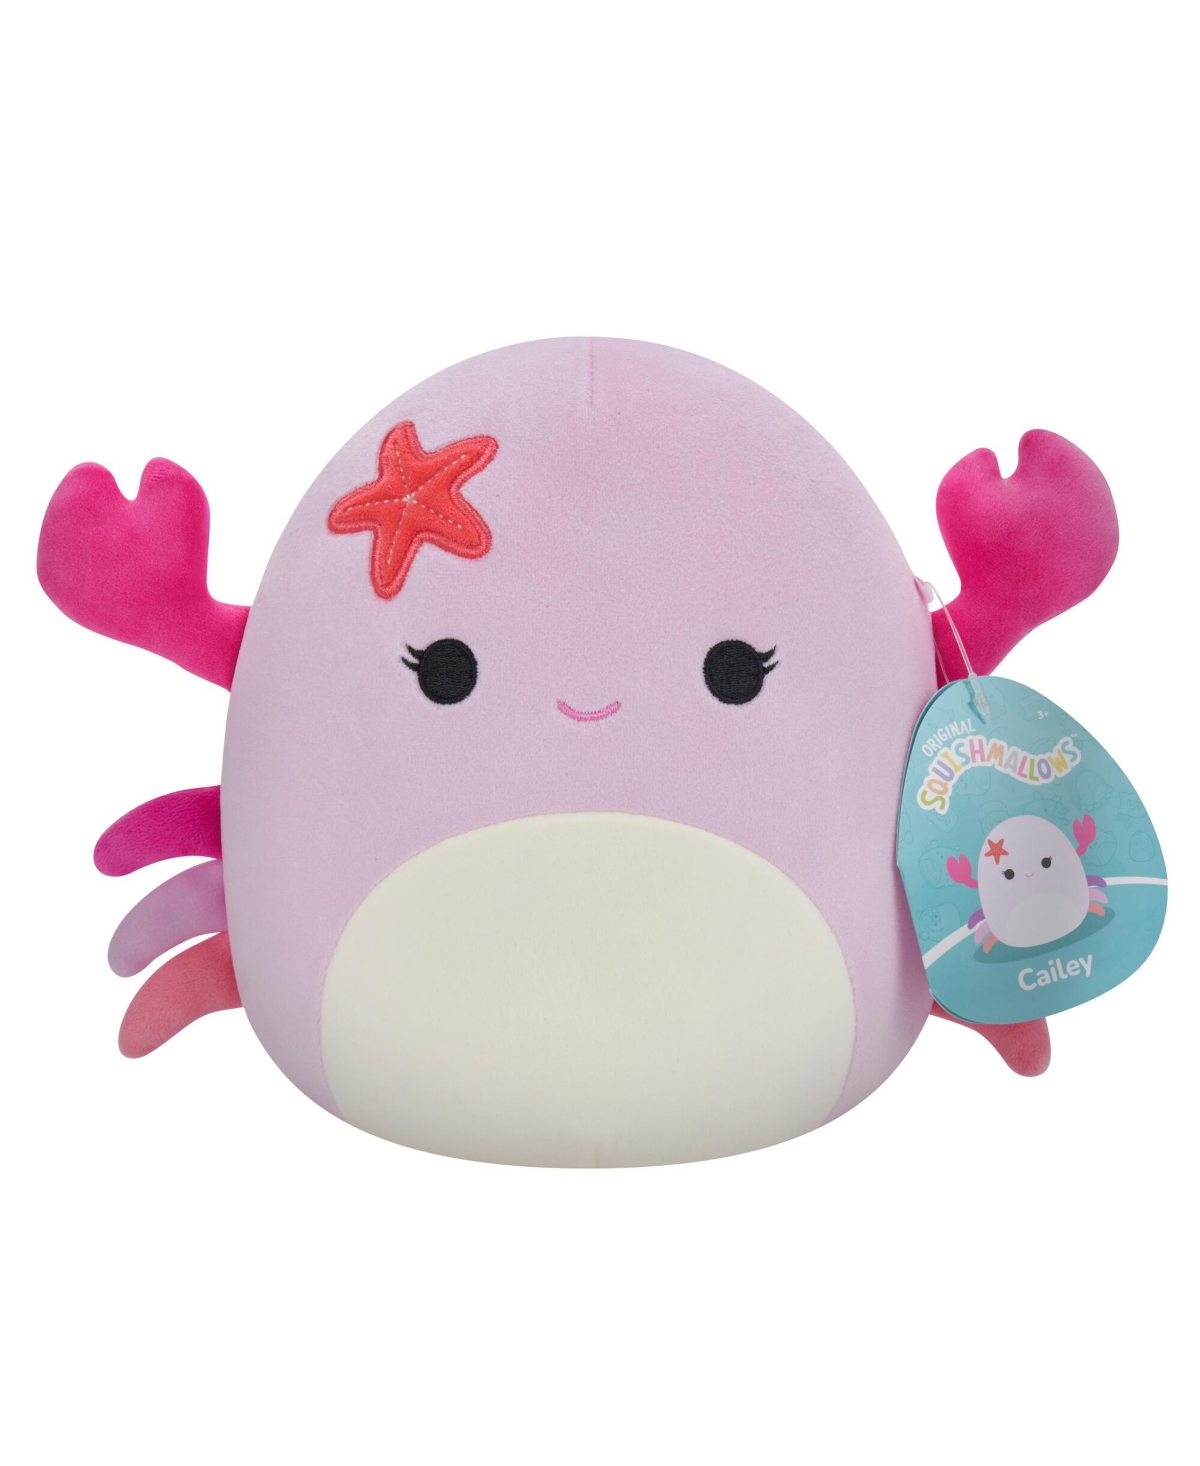 Squishmallows Kids' 8" Cailey, Pink Crab With Starfish Pin Plush In Multi Color